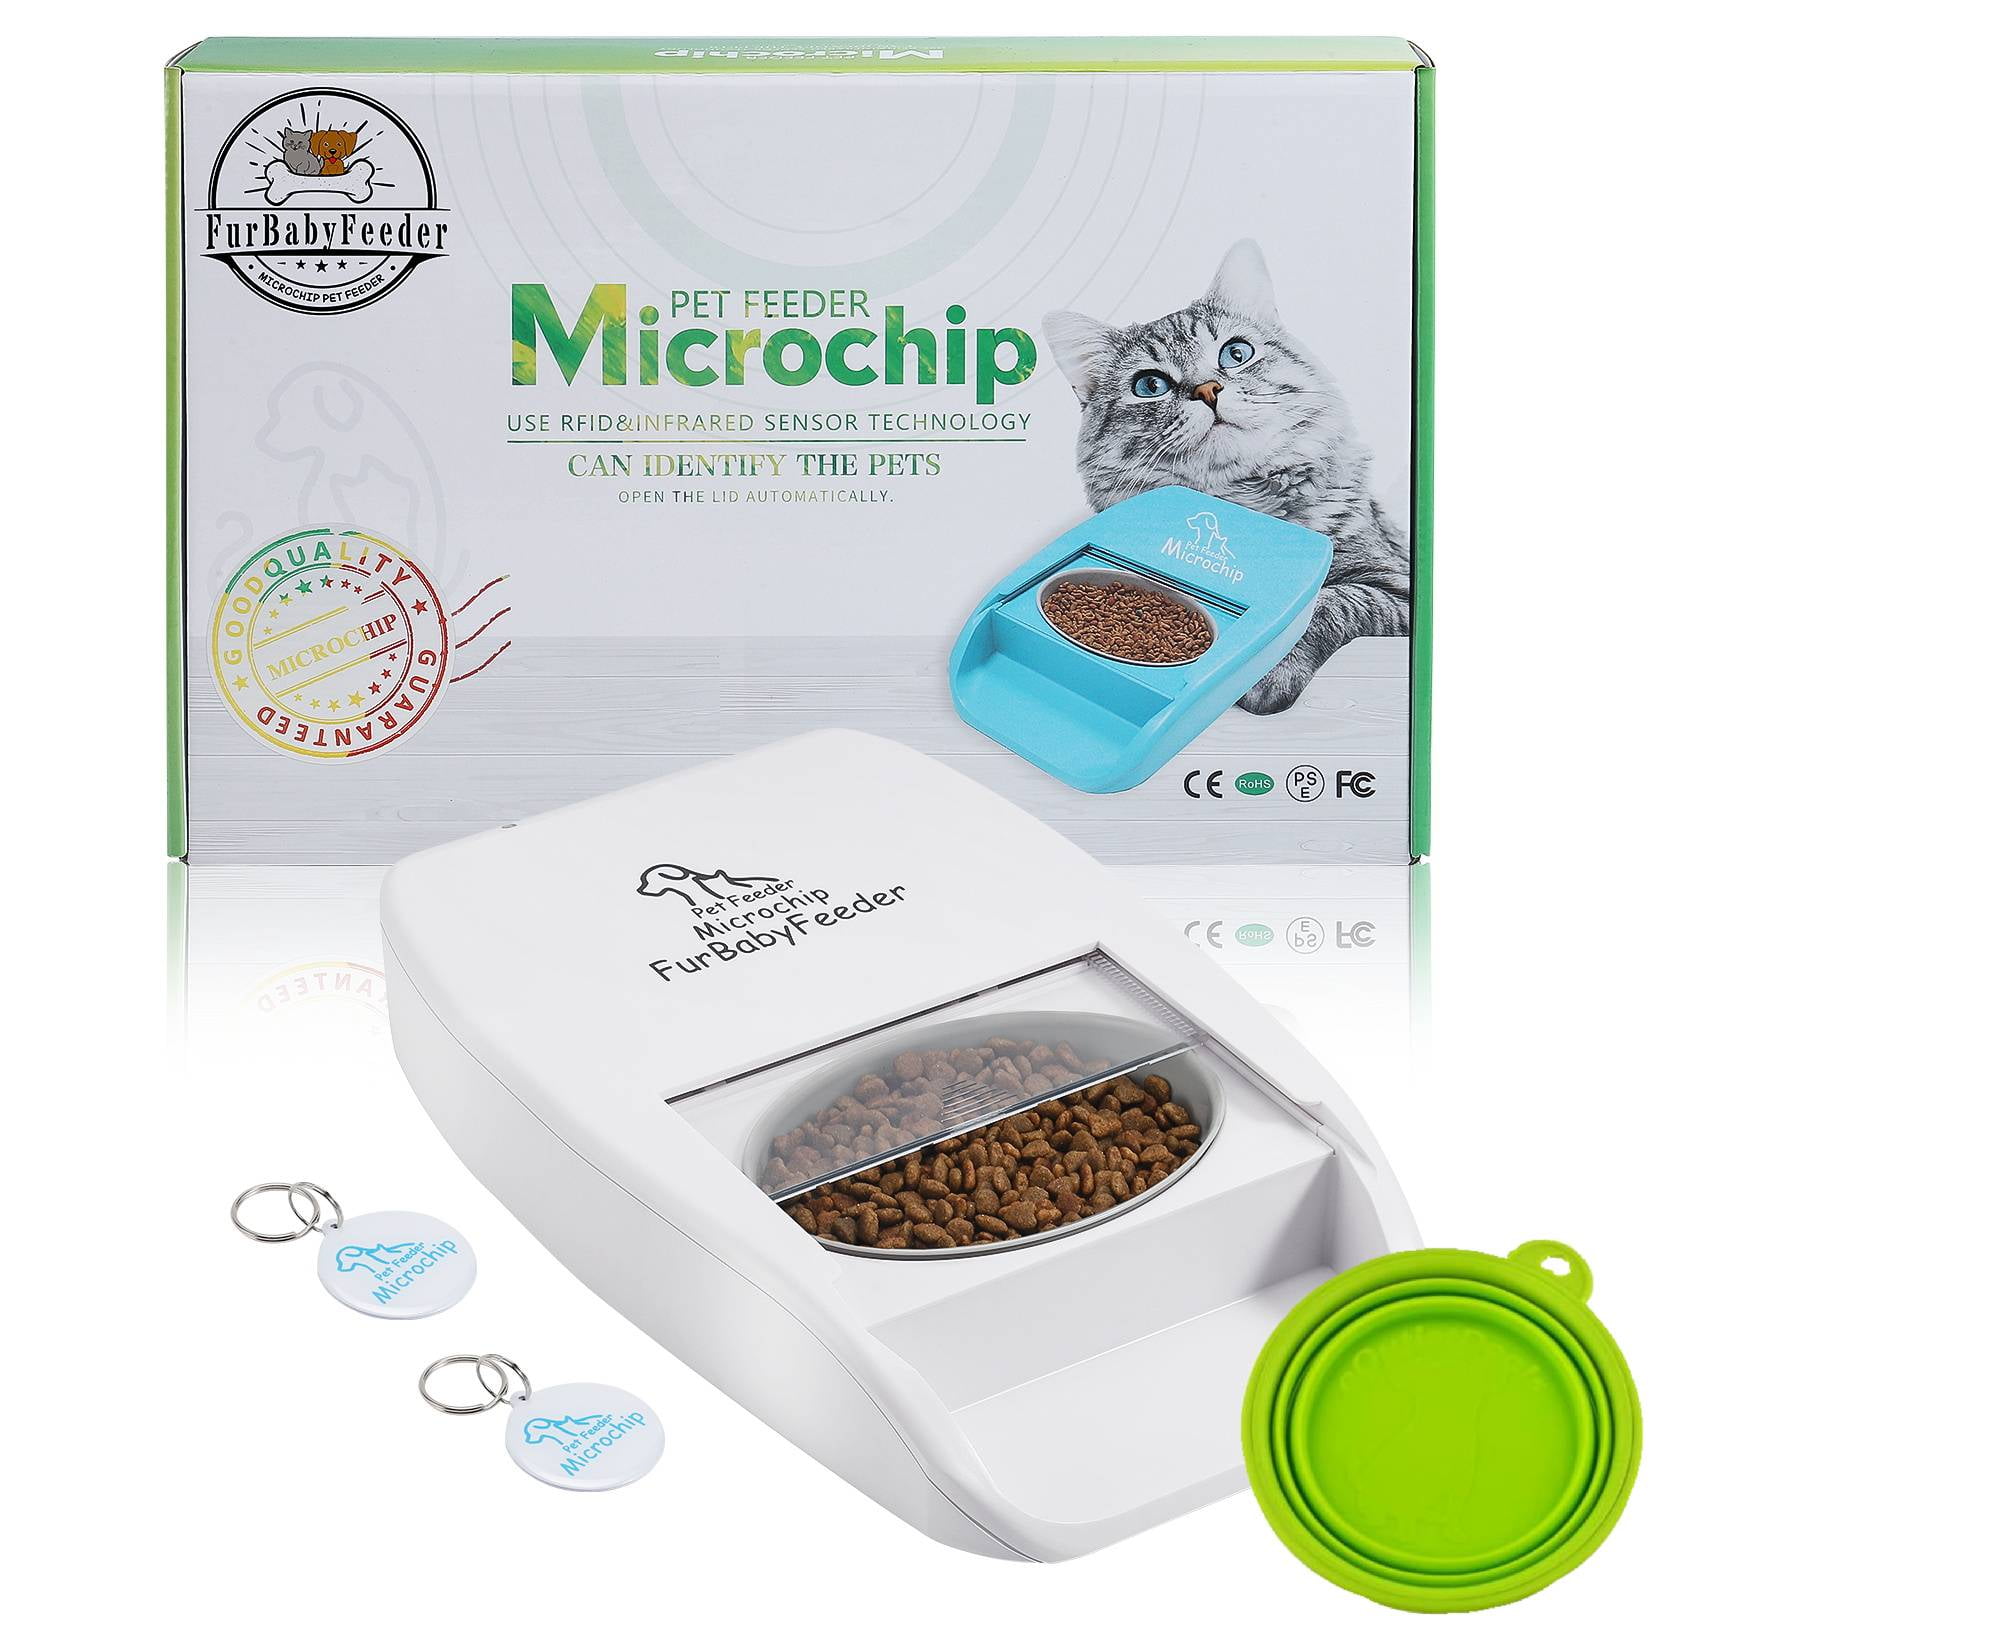 SureFeed Microchip Pet Feeder Mat and Bowl Set, Blue